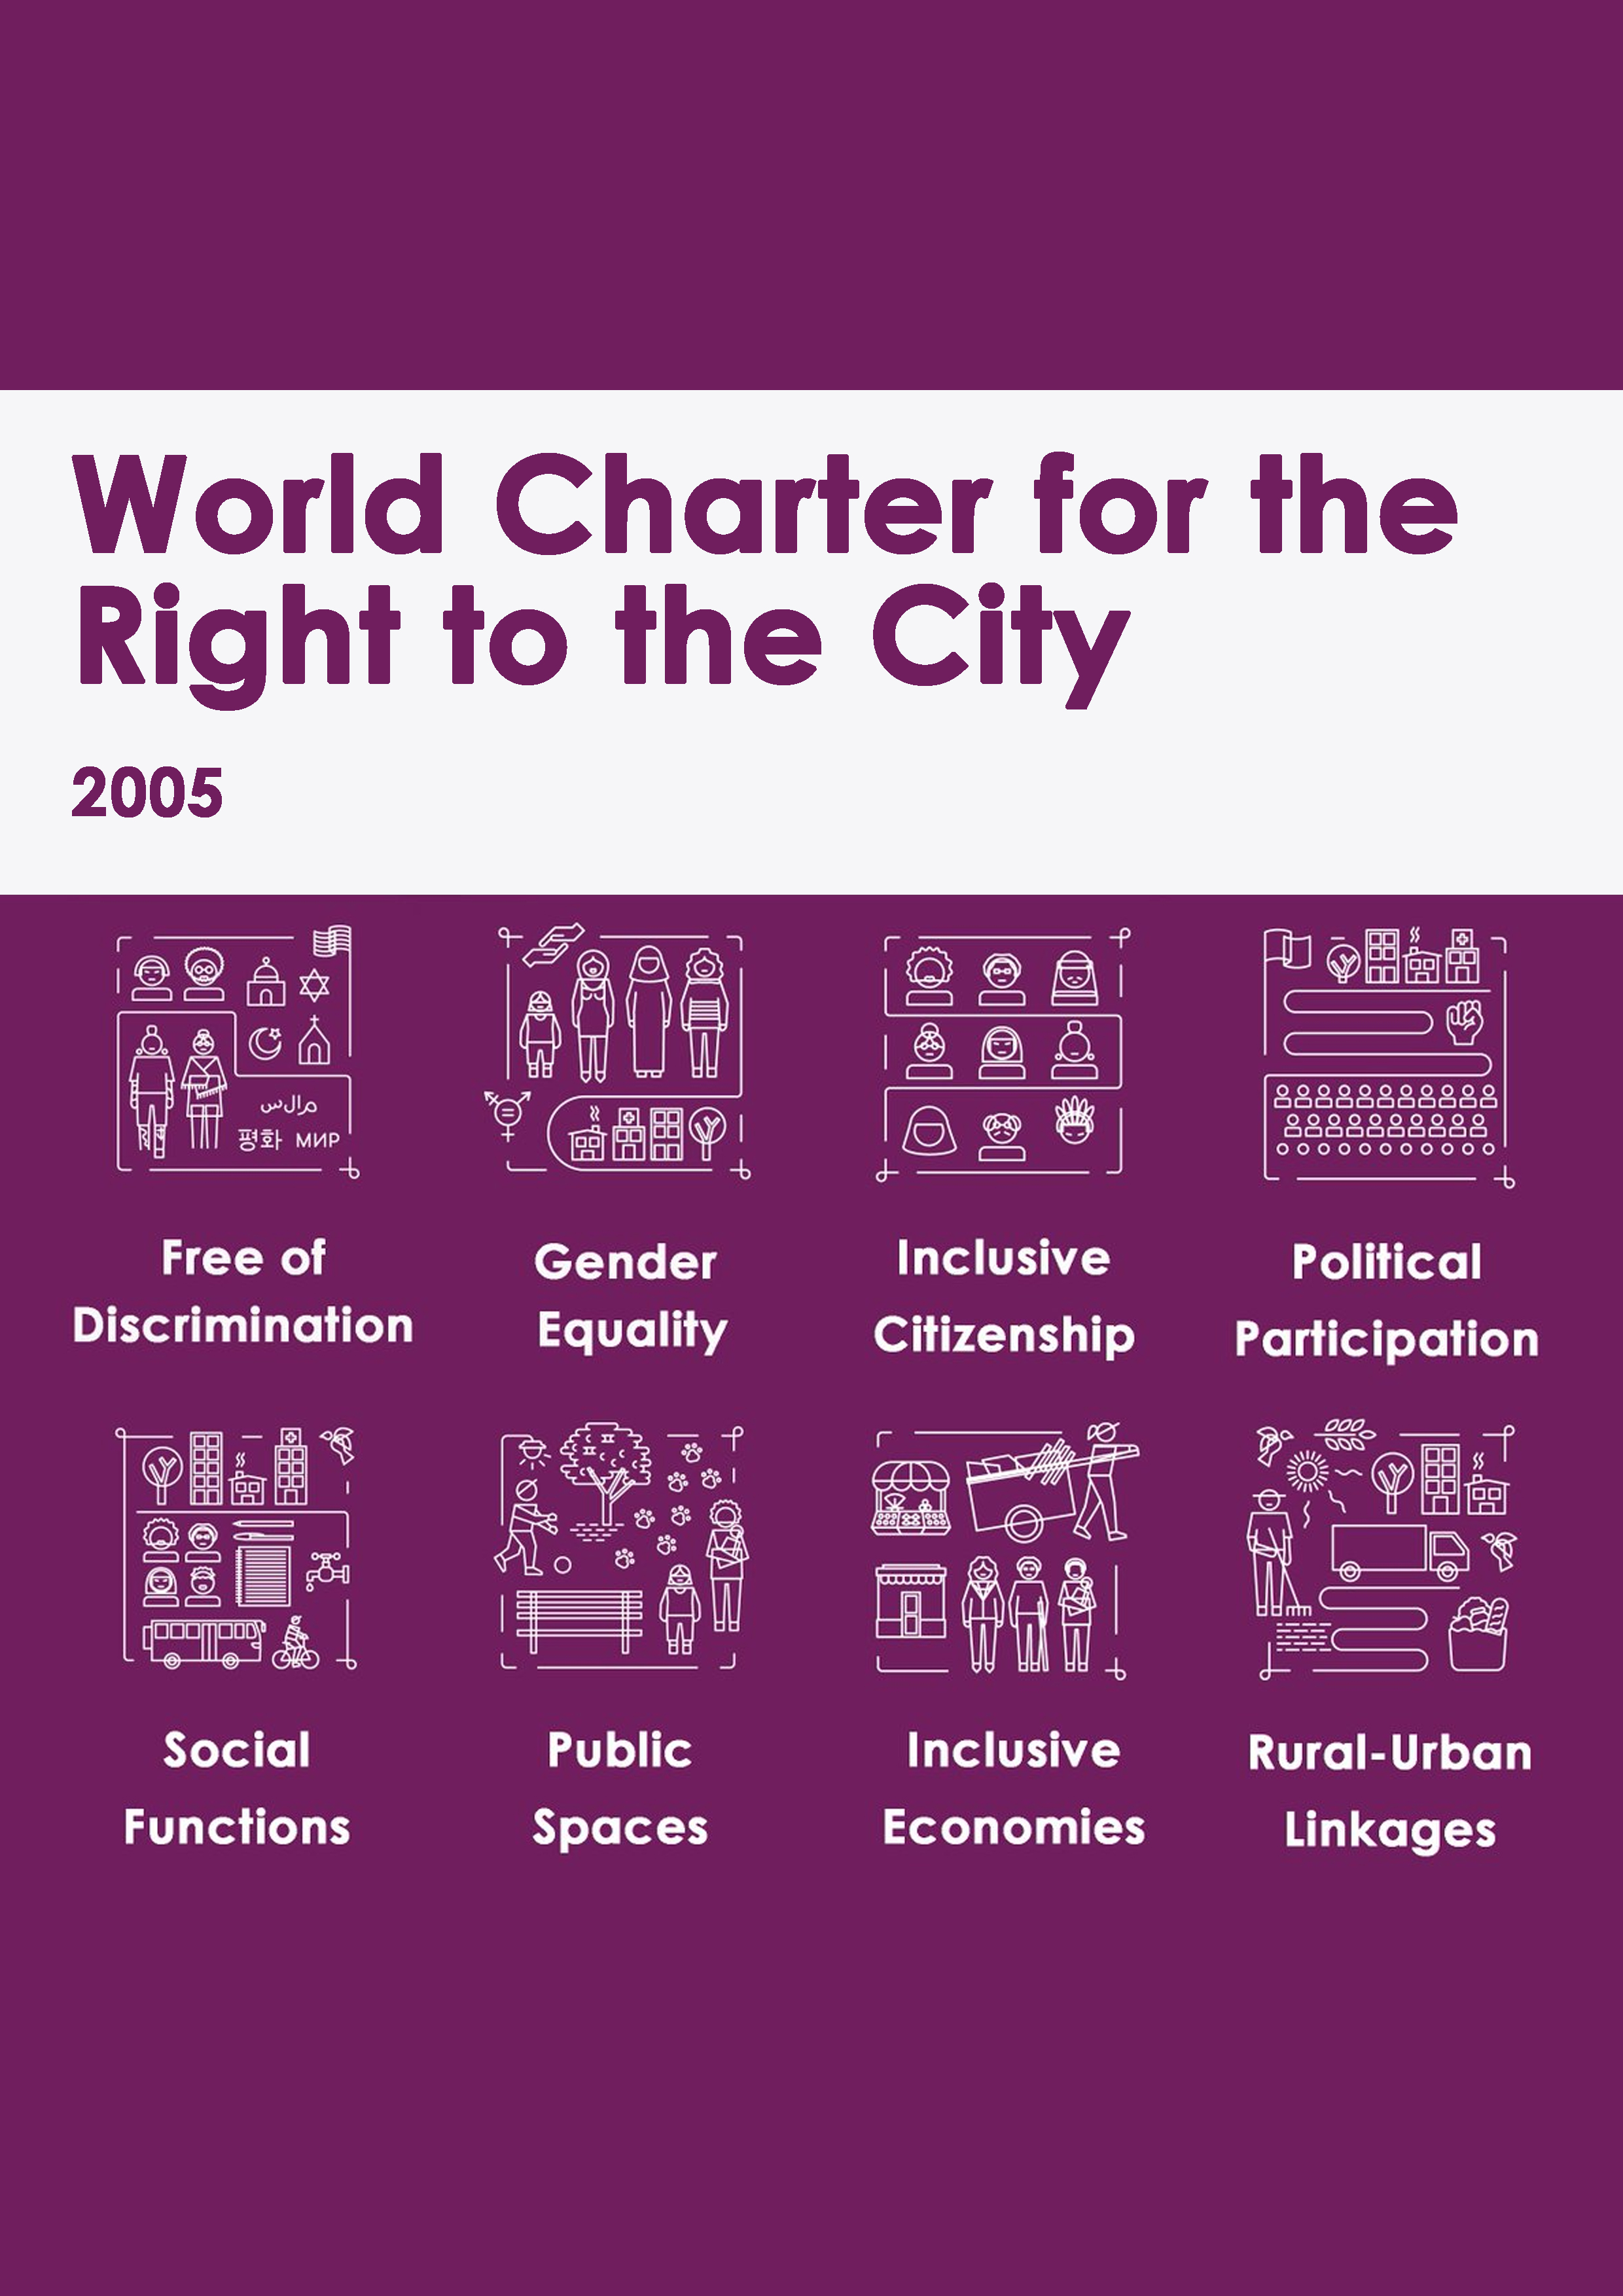 World Charter for the Right to the City